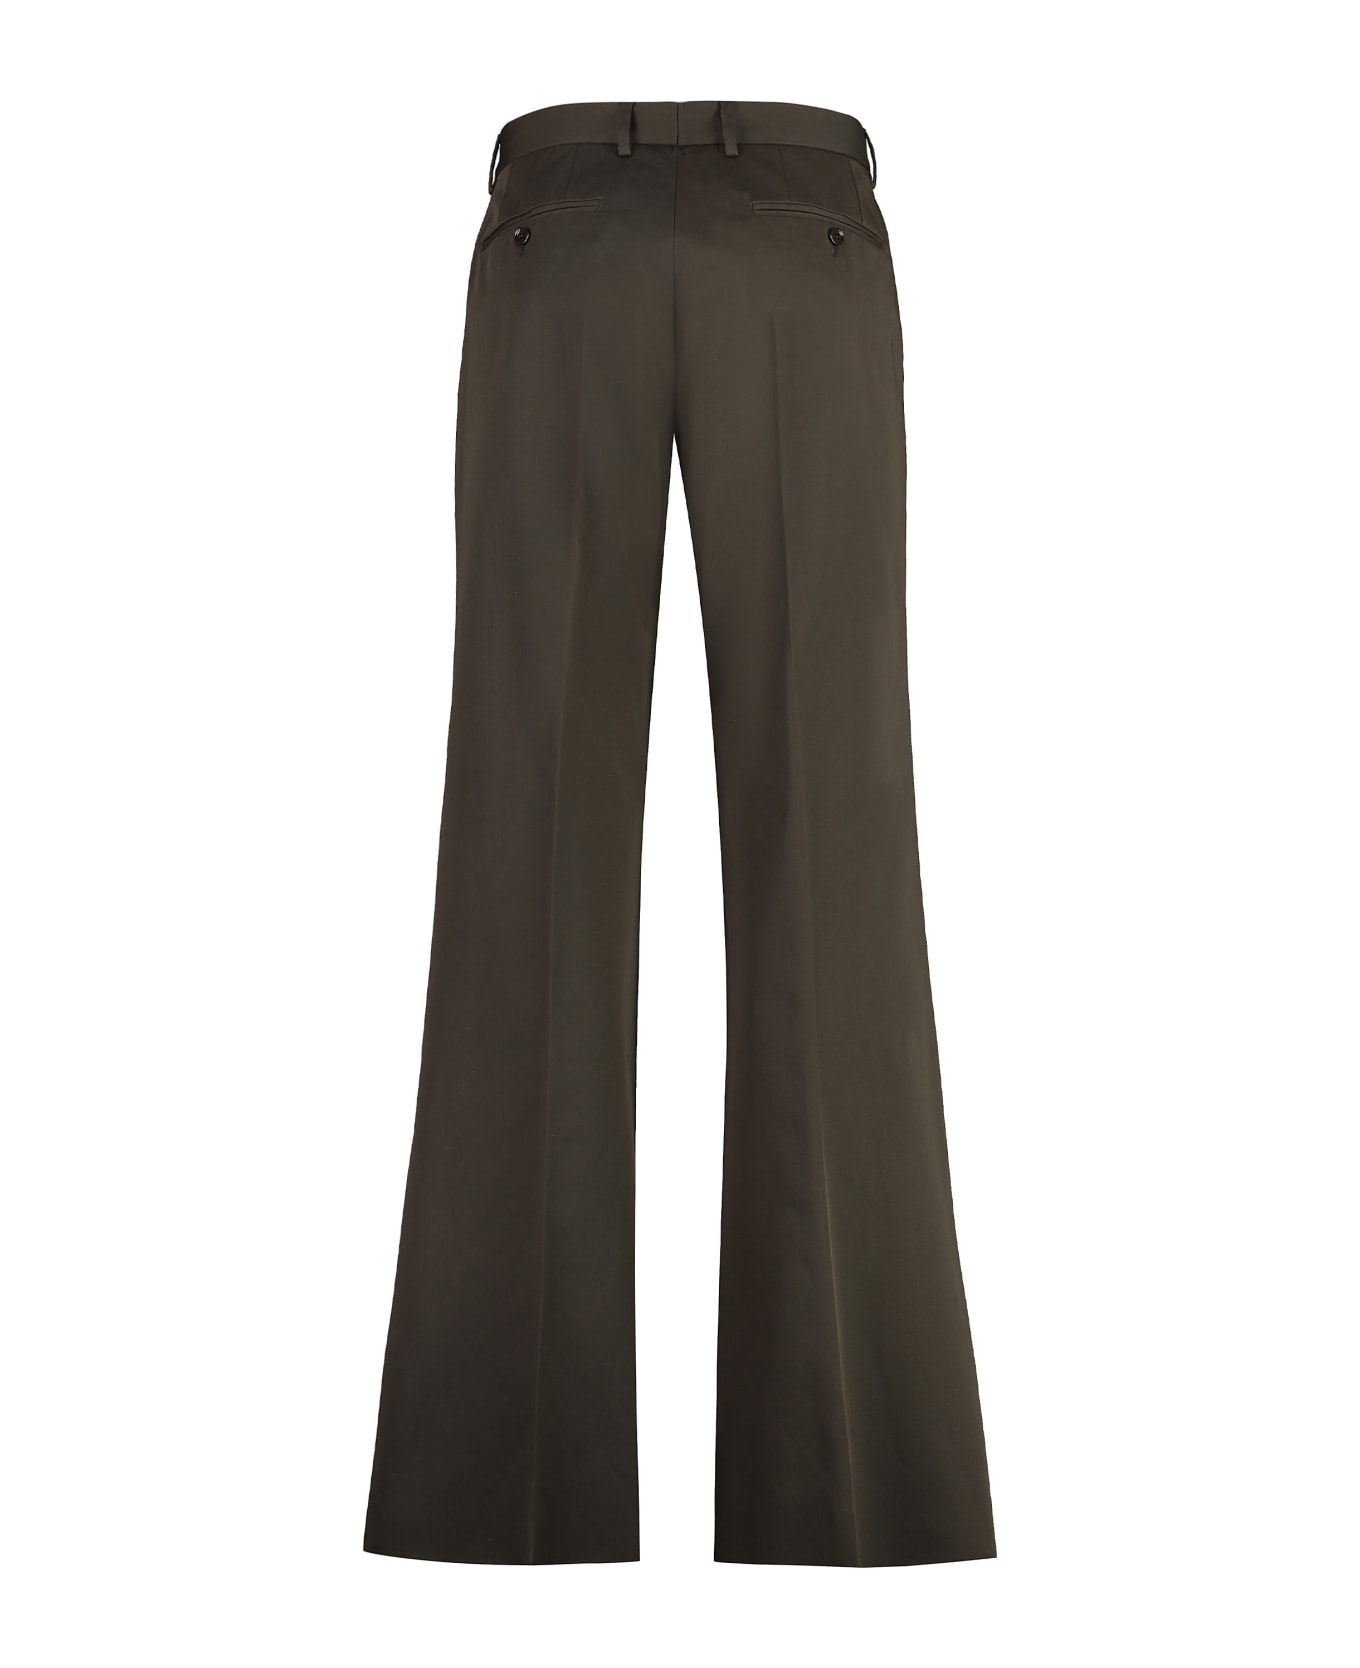 Dolce & Gabbana Cotton Trousers - brown ボトムス